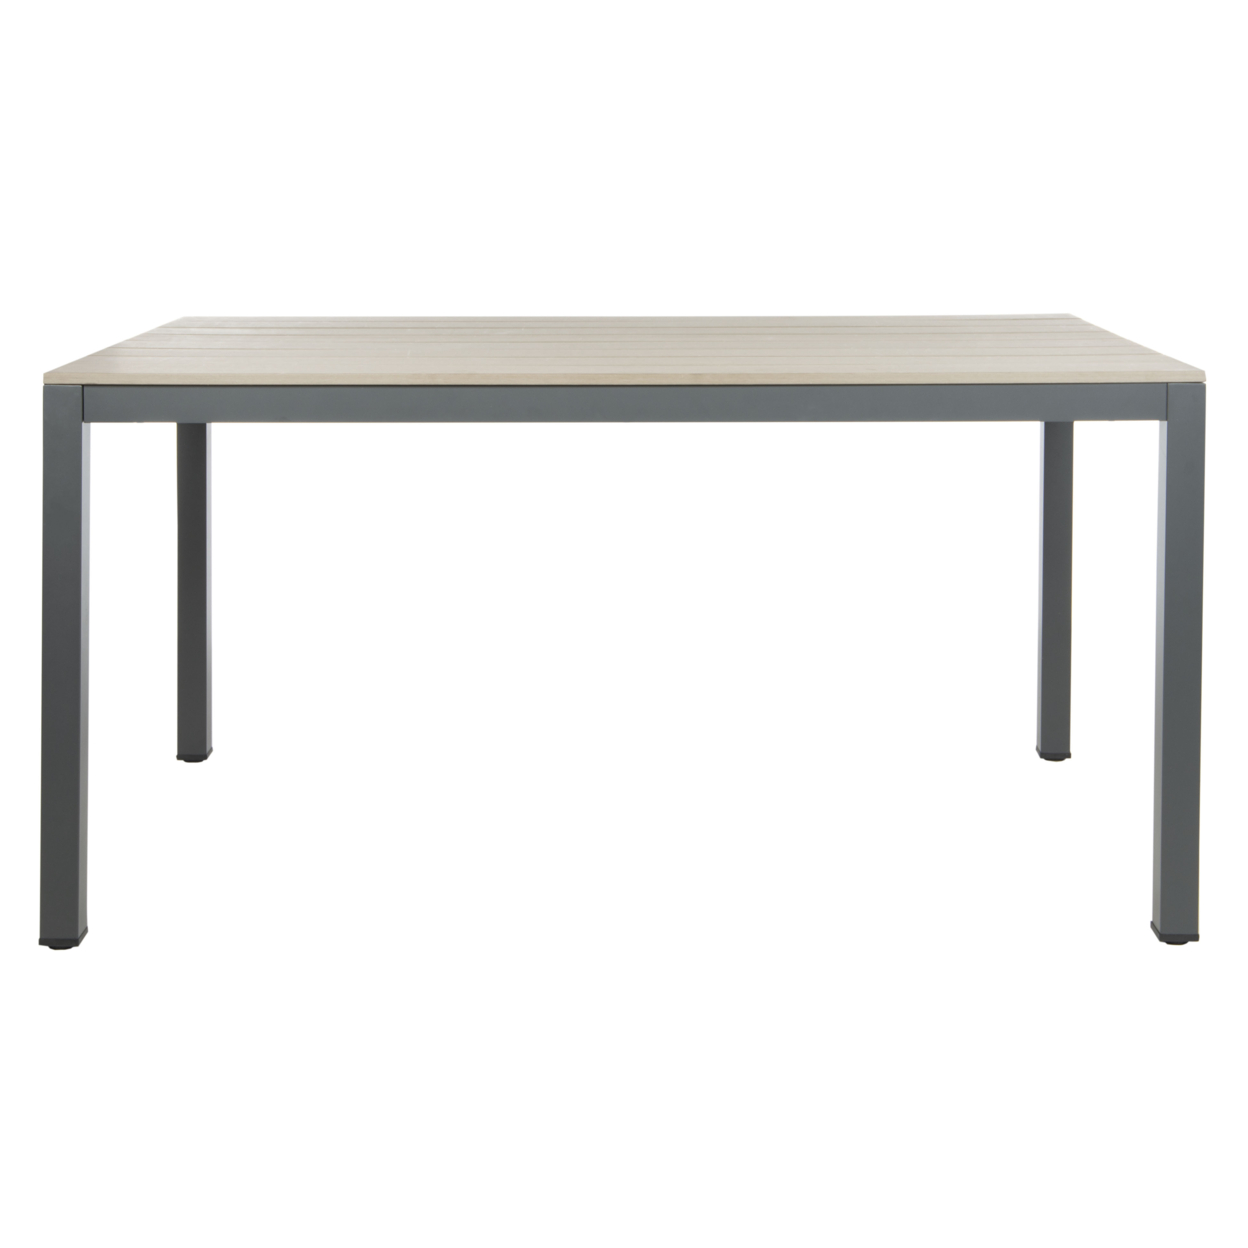 SAFAVIEH Outdoor Collection Beldan Dining Table Distressed Taupe